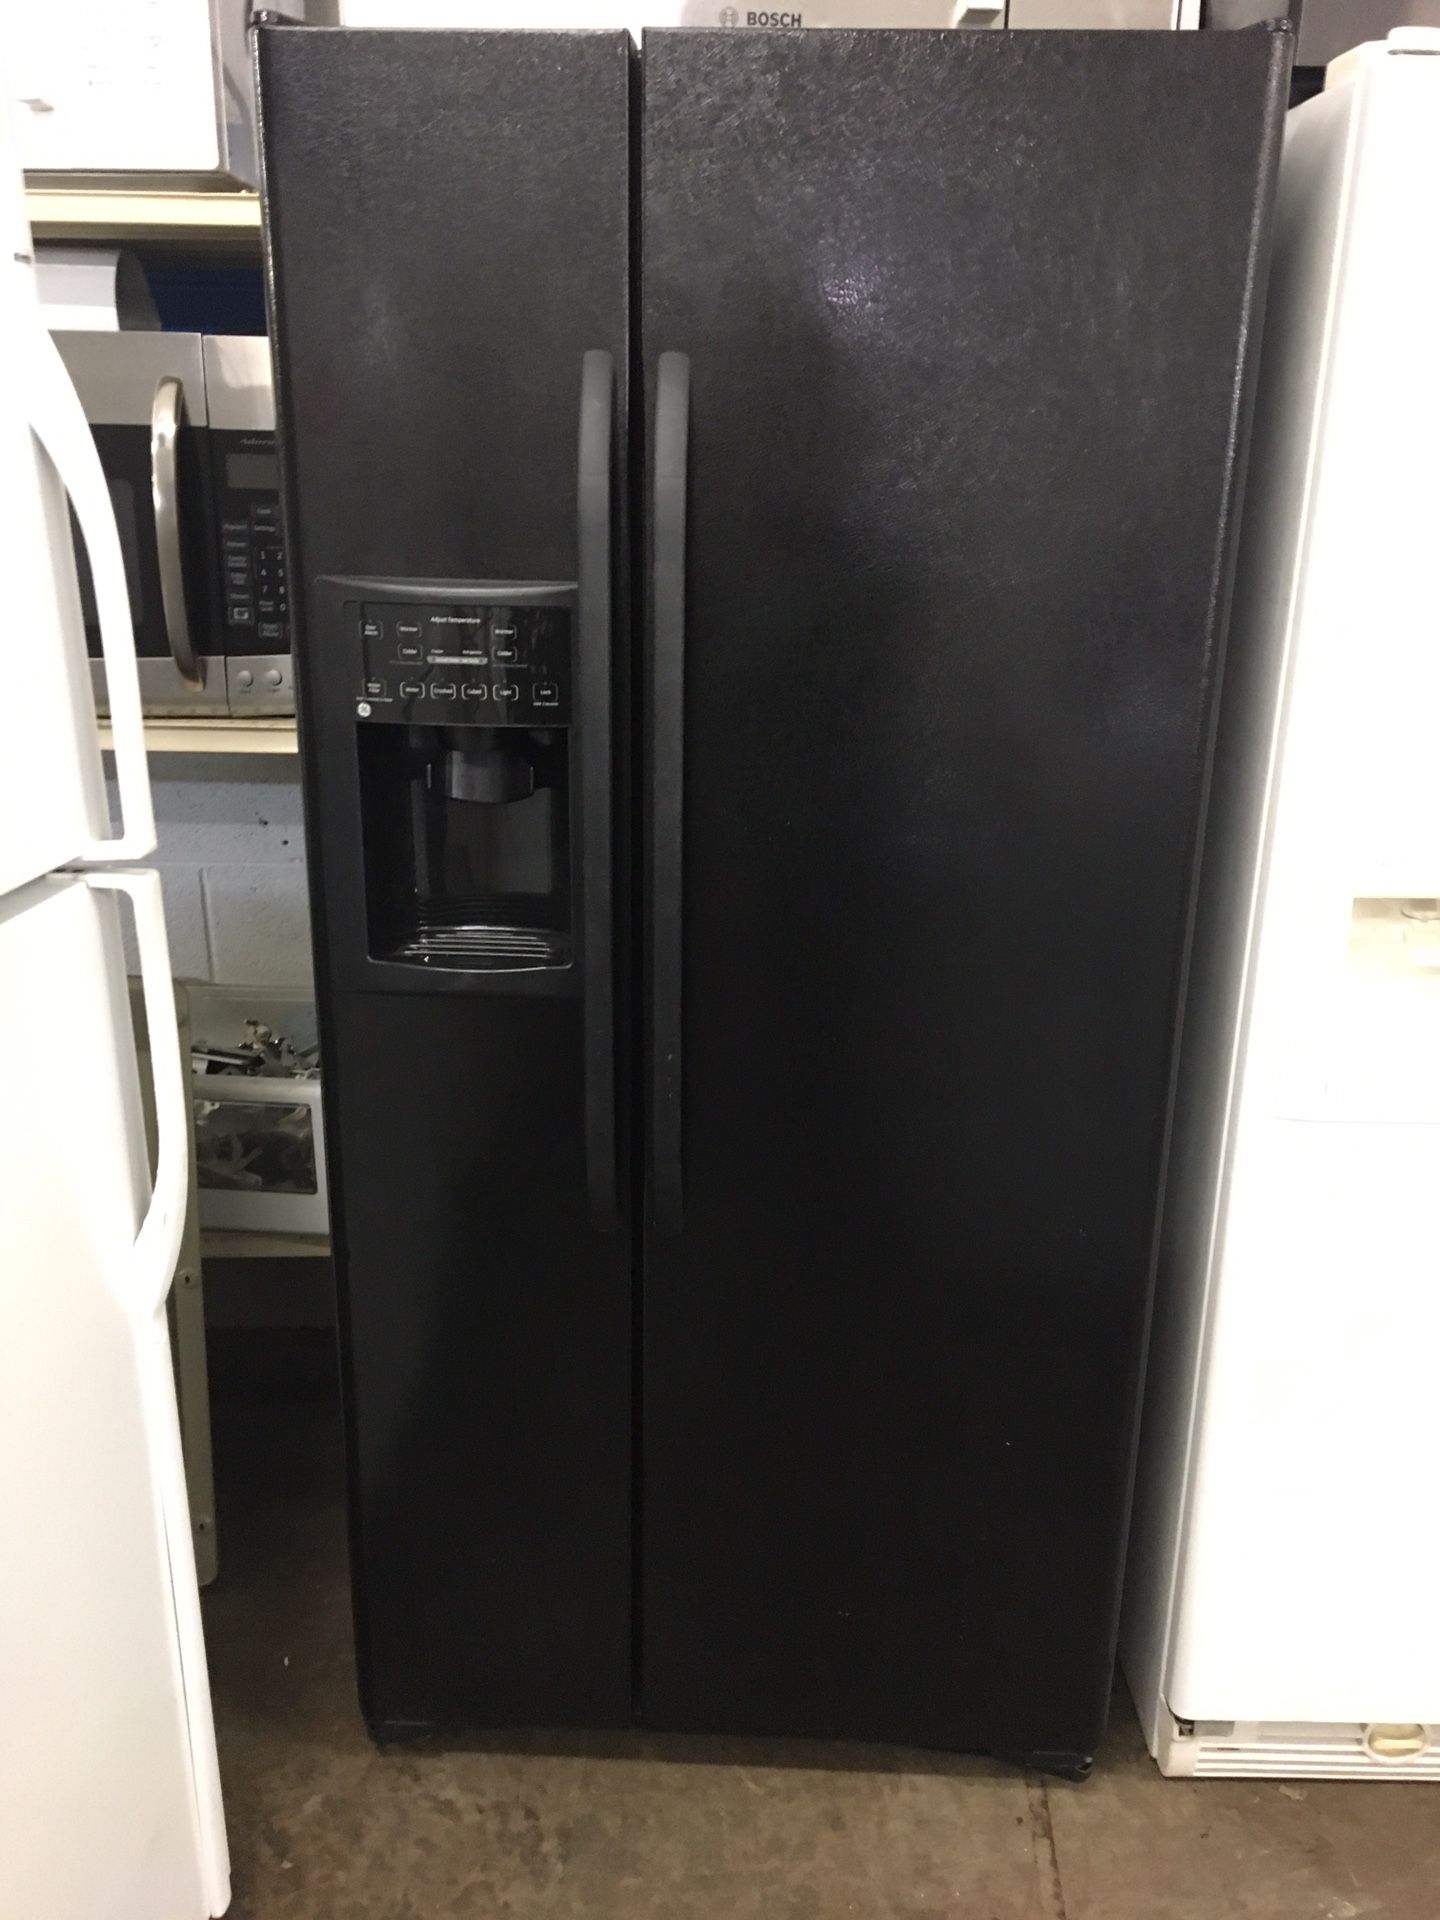 Financing - 90 Day Warranty - Guaranteed Refurbished Black side-by-side refrigerator water and ice dispenser